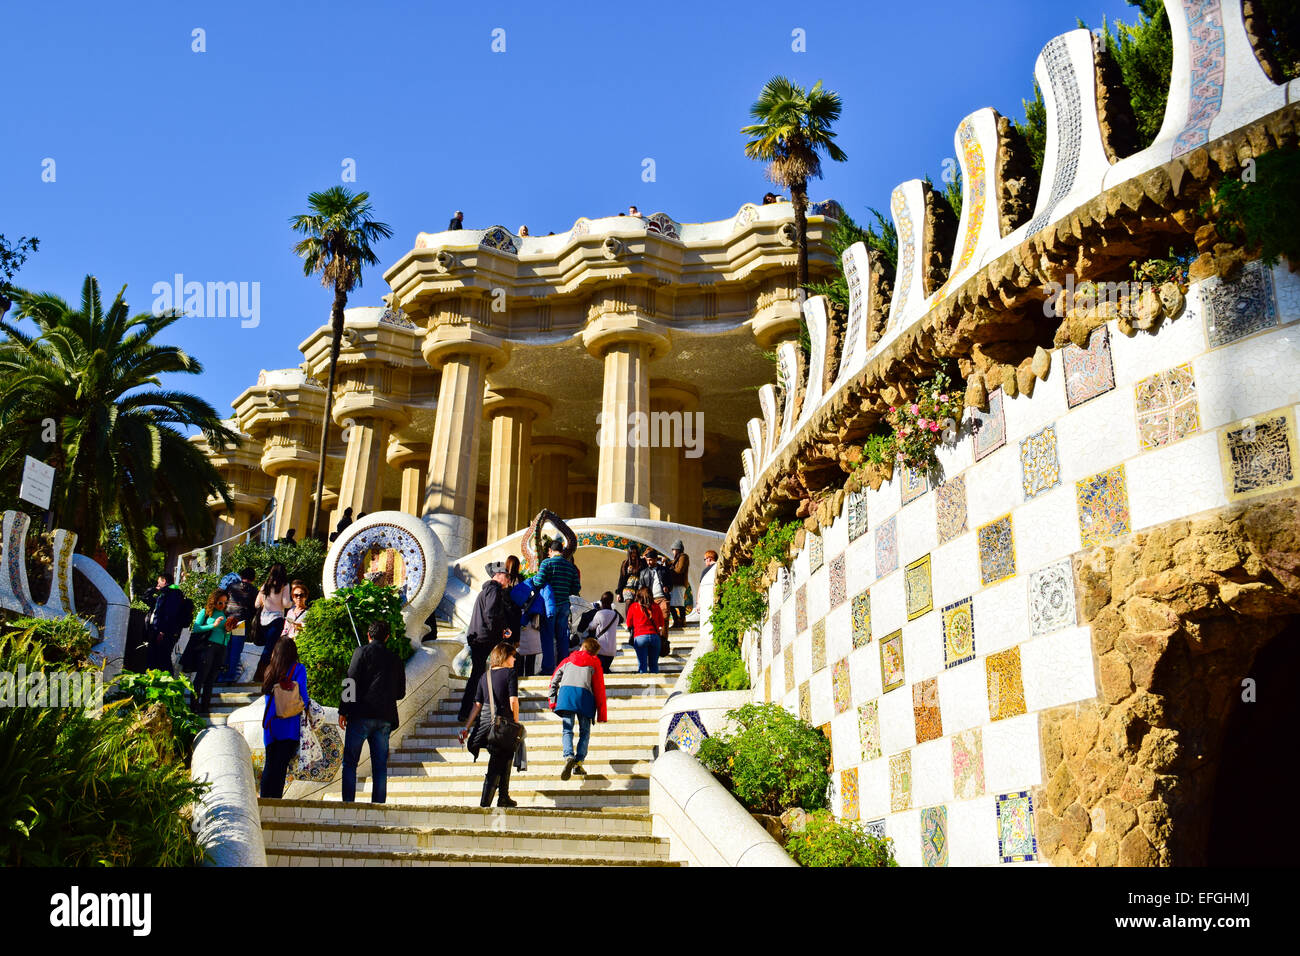 The Dragon Stairway. Park Guell by Antoni Gaudi architect. Barcelona, Catalonia, Spain. Stock Photo